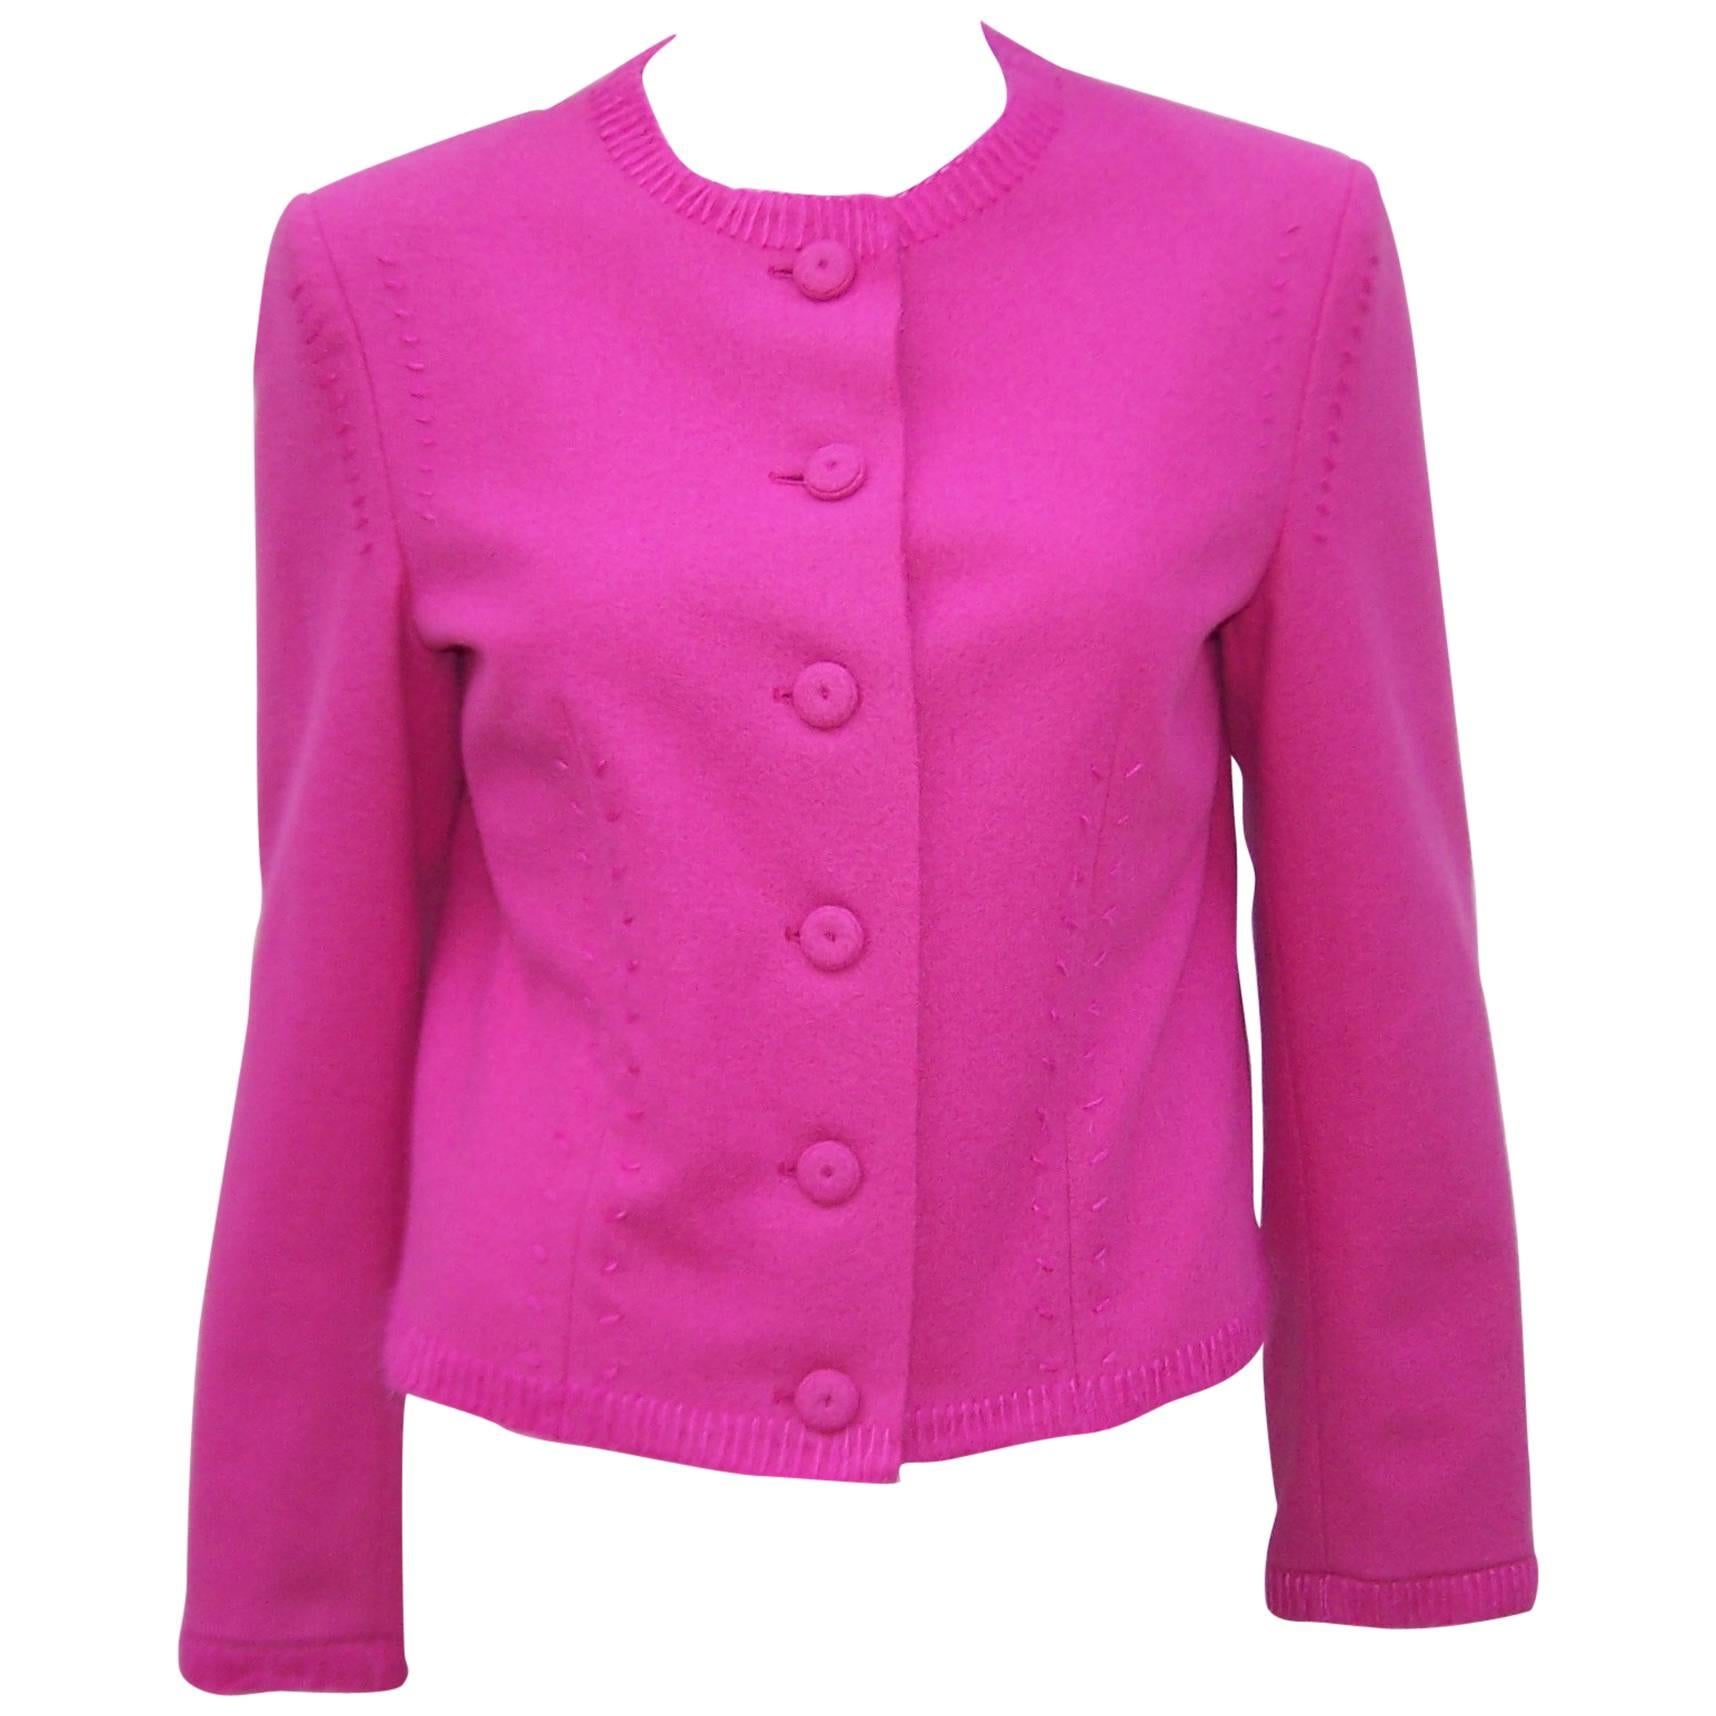 Hot Pink Moschino Wool Felt Jacket With Deconstructed Details